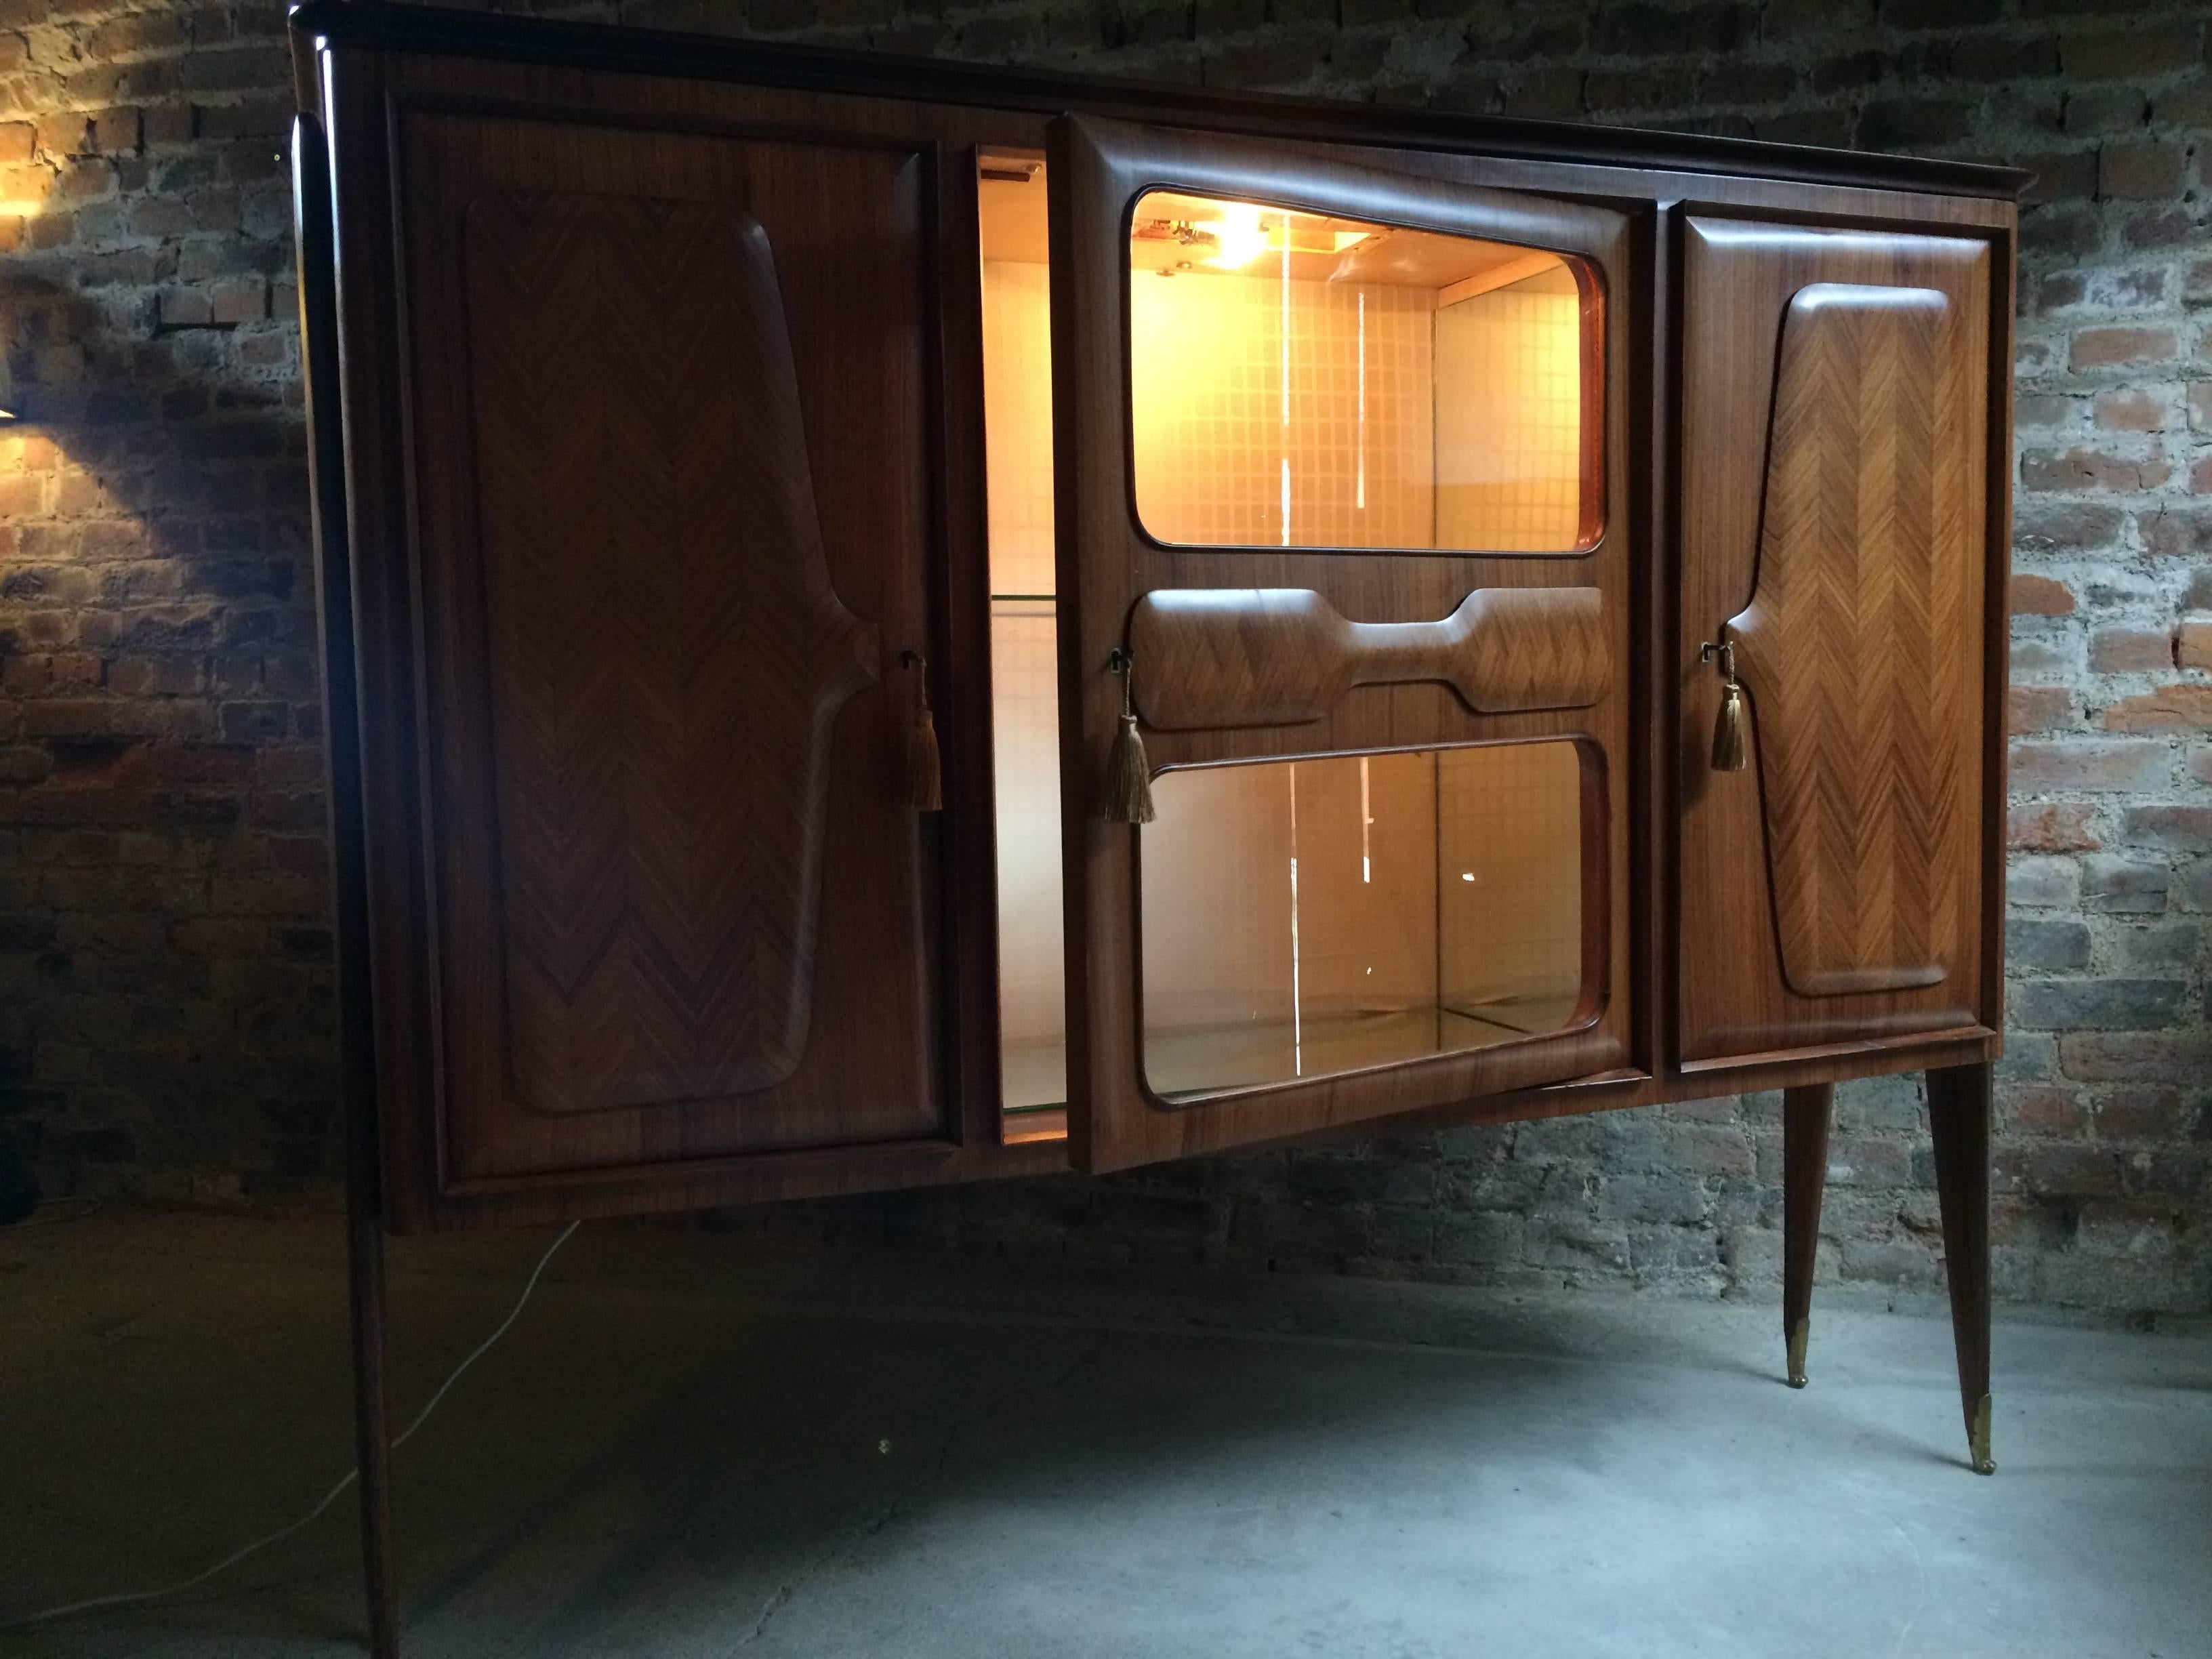 An Italian midcentury walnut bar cabinet dating from 1950s, designed by Vittorio Dassi (Milan, 1893-1973). It features two sycamore lined cabinets flanking an illuminated central glazed and mirrored section with glass internal shelves and working